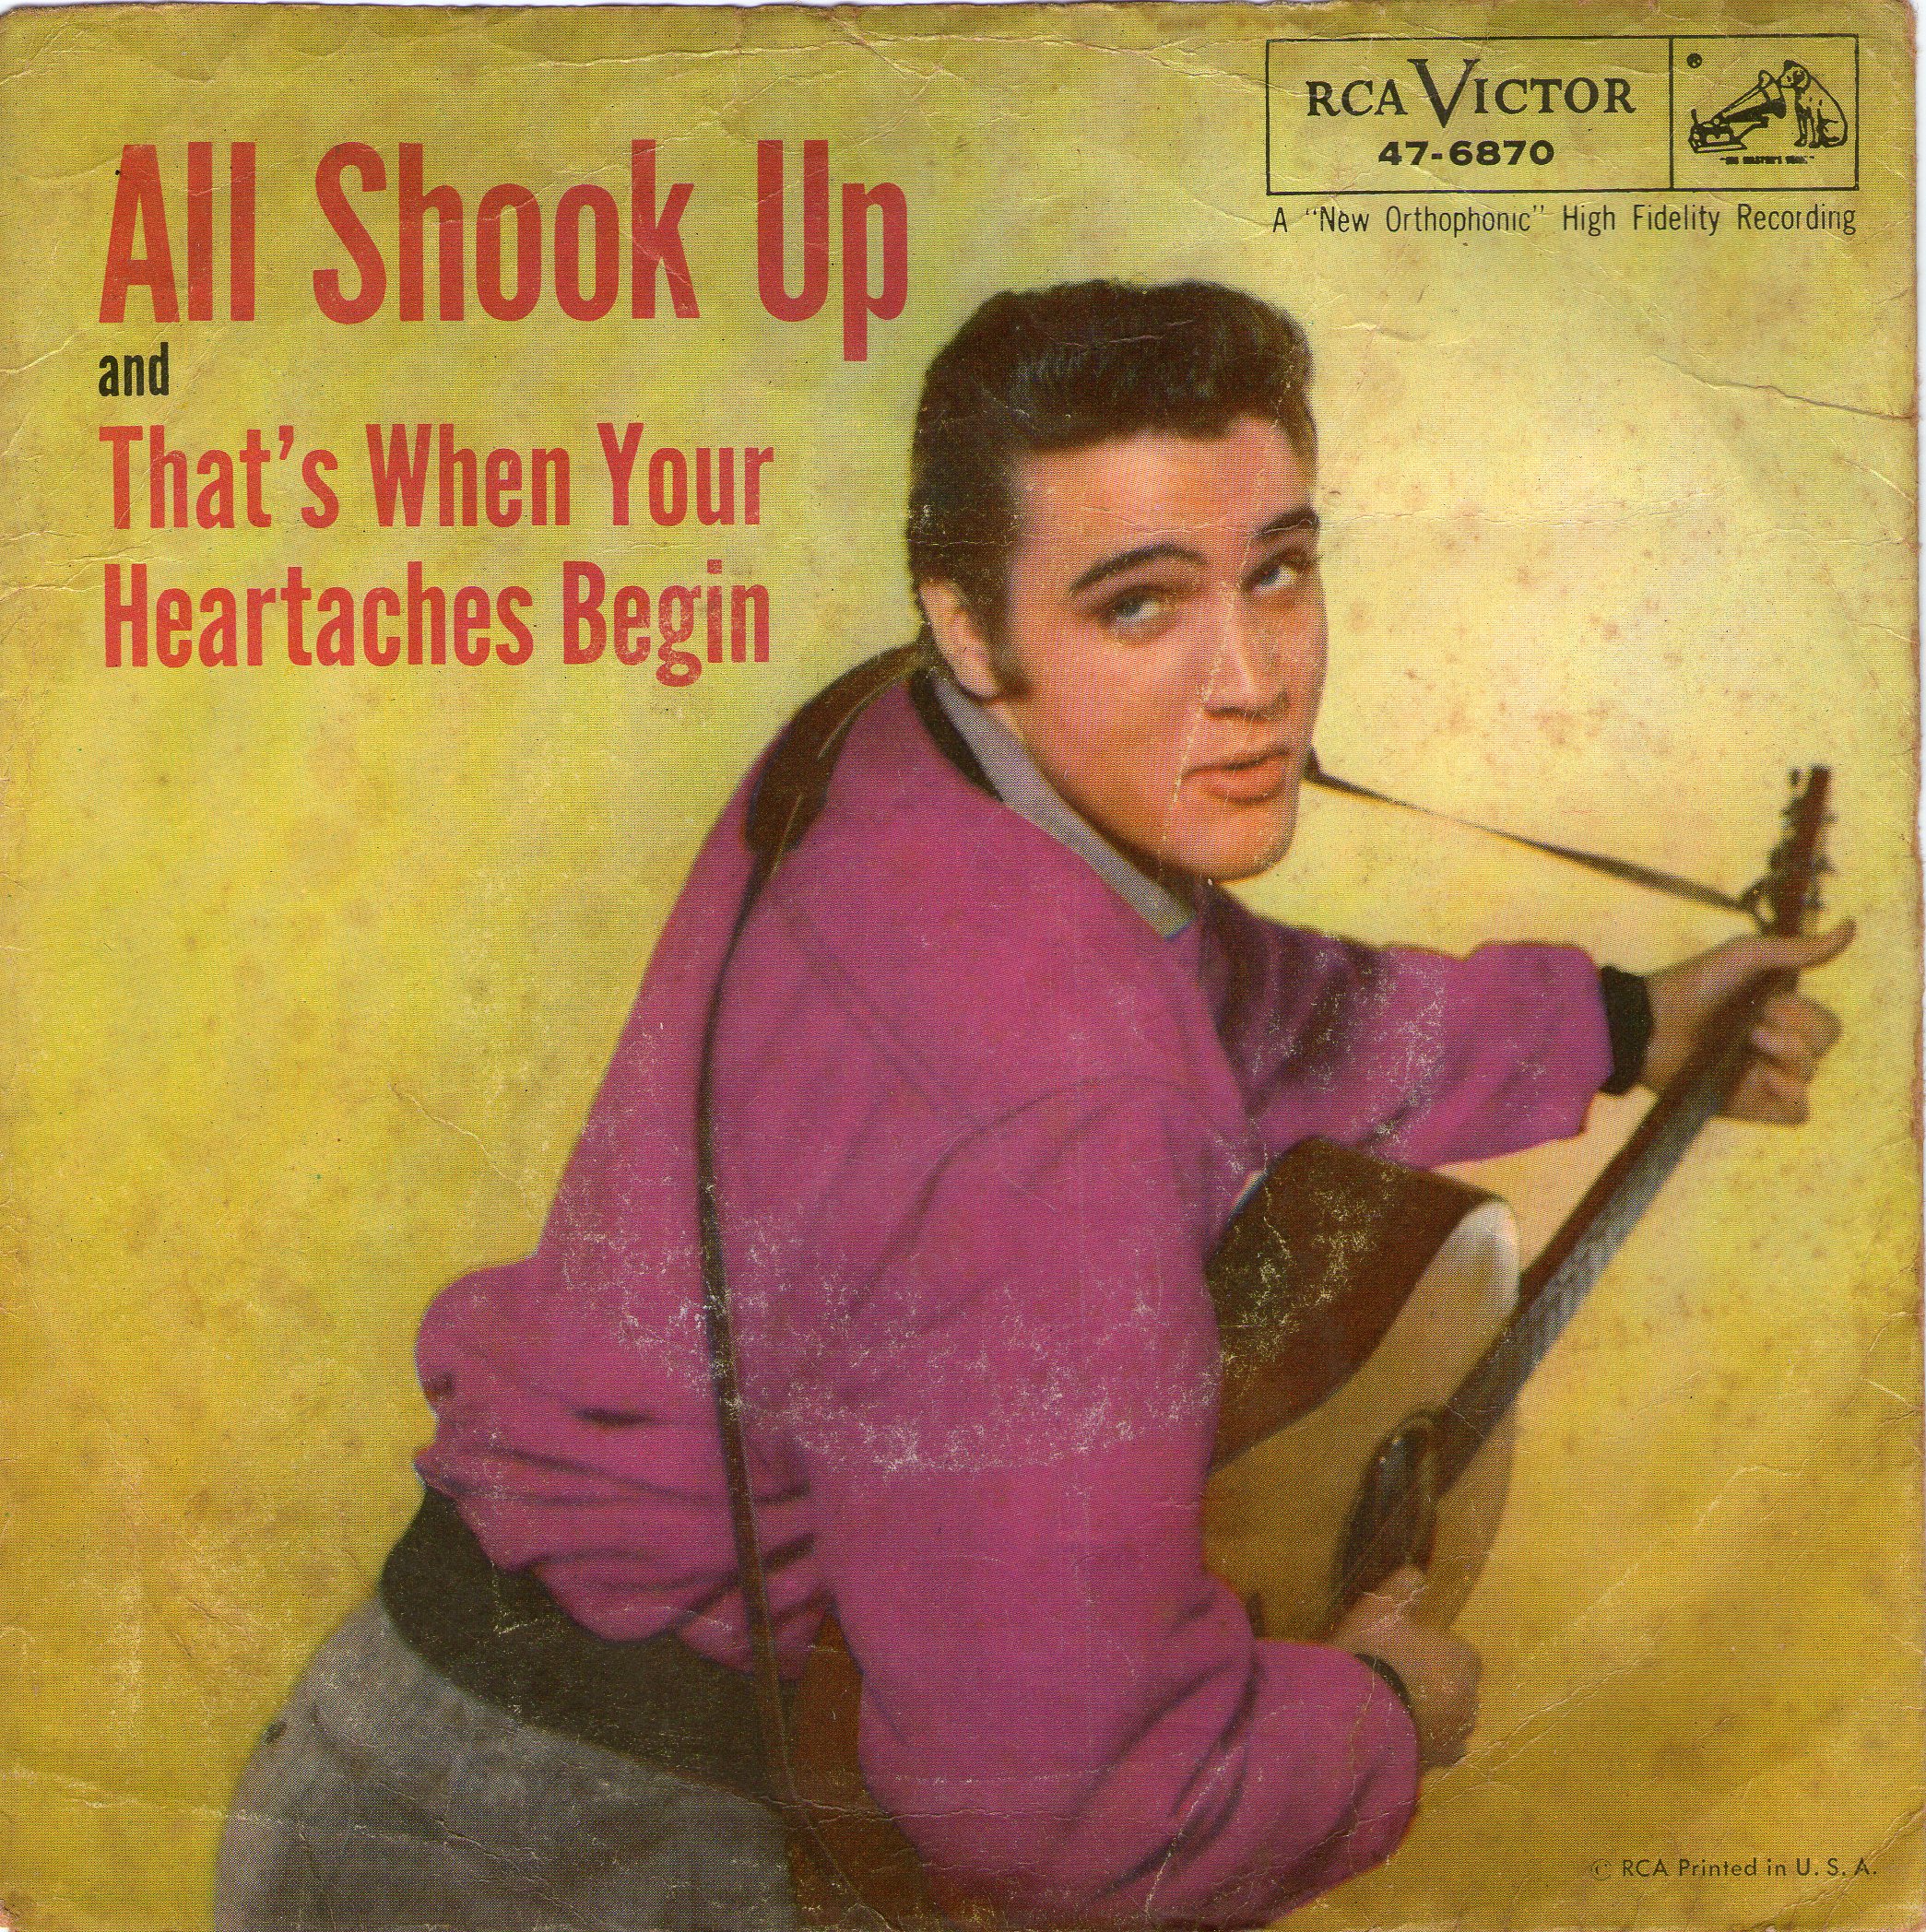 All Shook Up / That's When Your Heartaches Begin Img1233ze1n